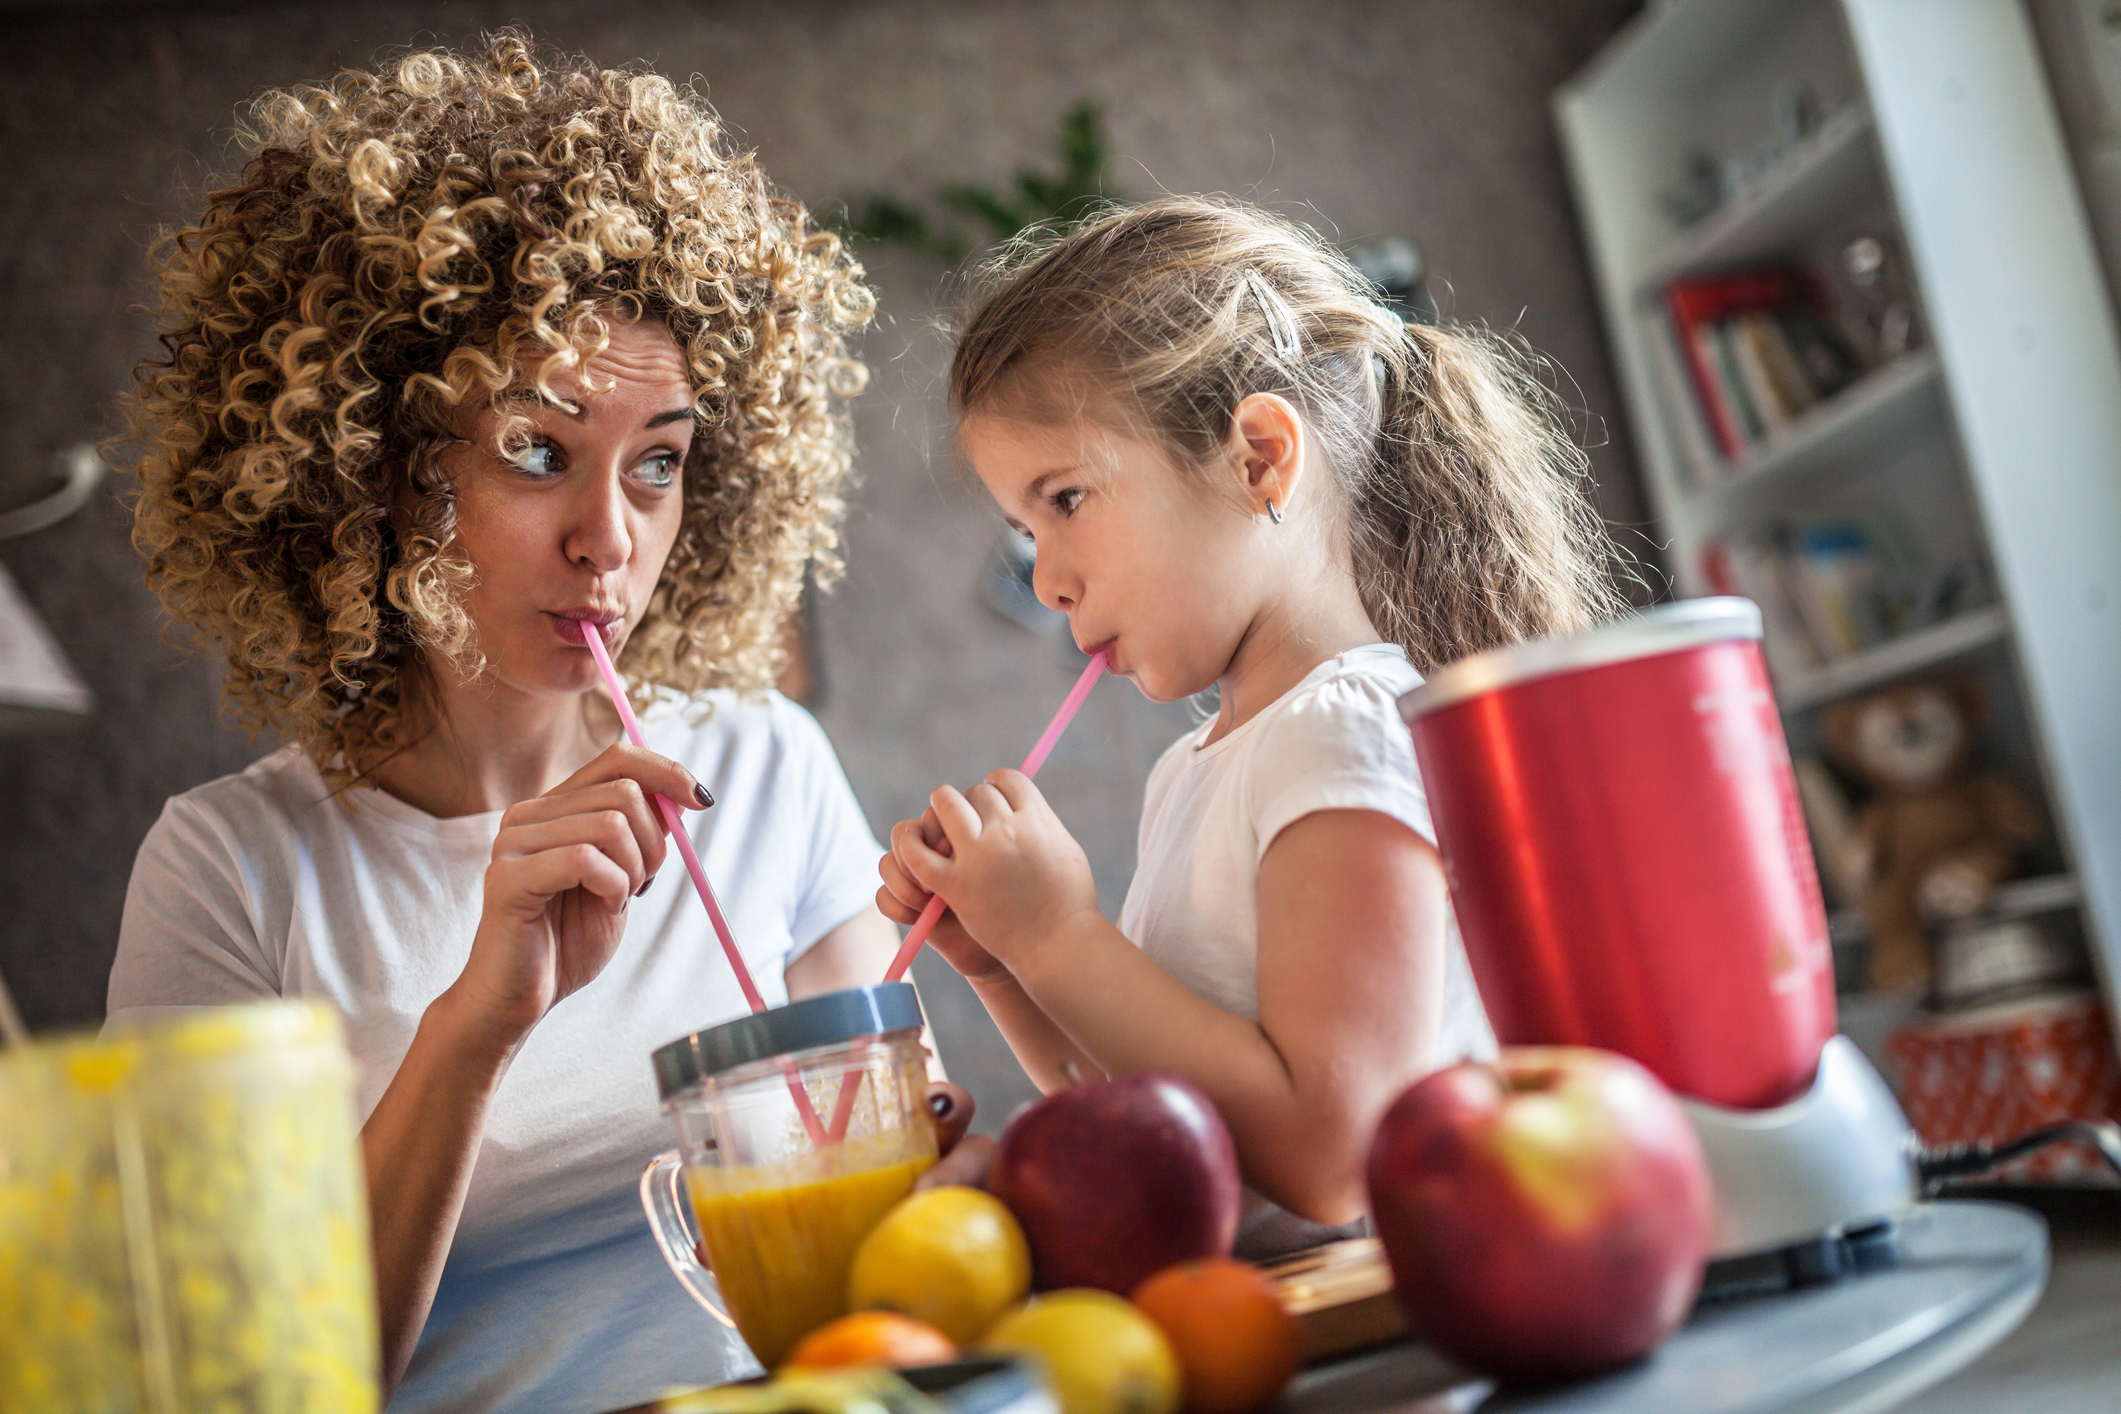 A mother and daughter drinking a smoothie from straws